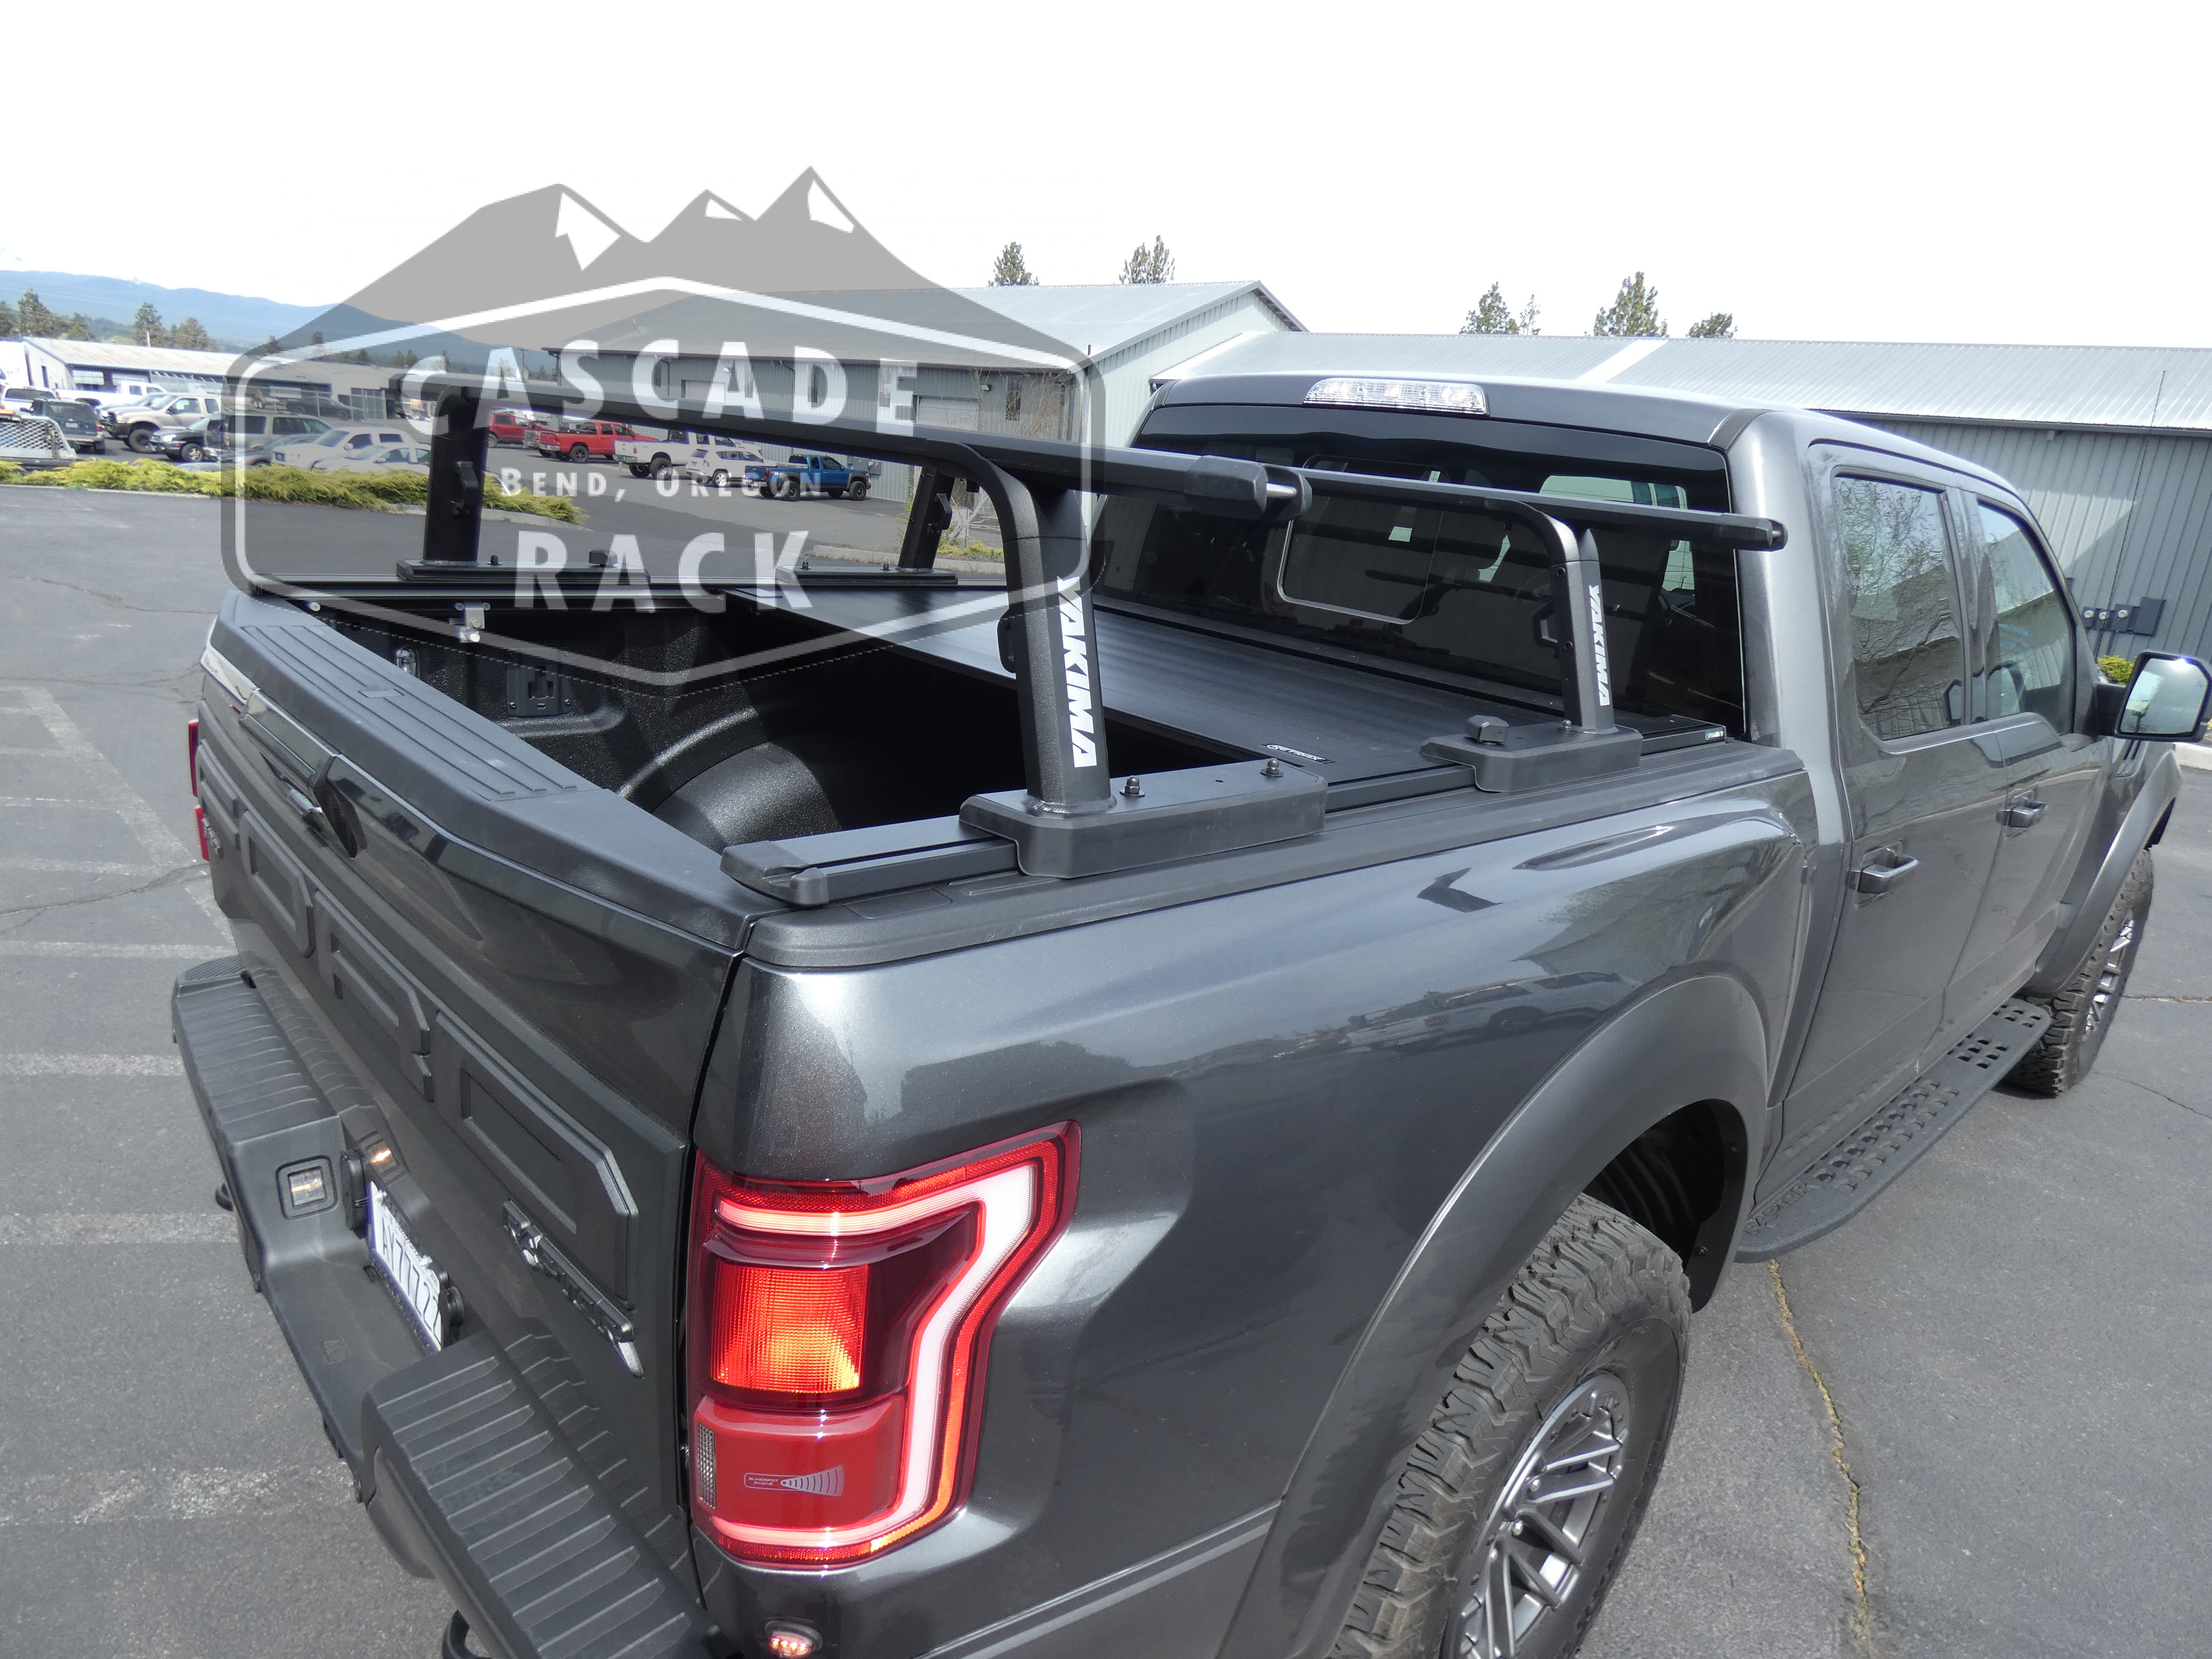 2019 Ford Raptor - Tonneau Cover and Truck Bed Rack - Retrax / Yakima